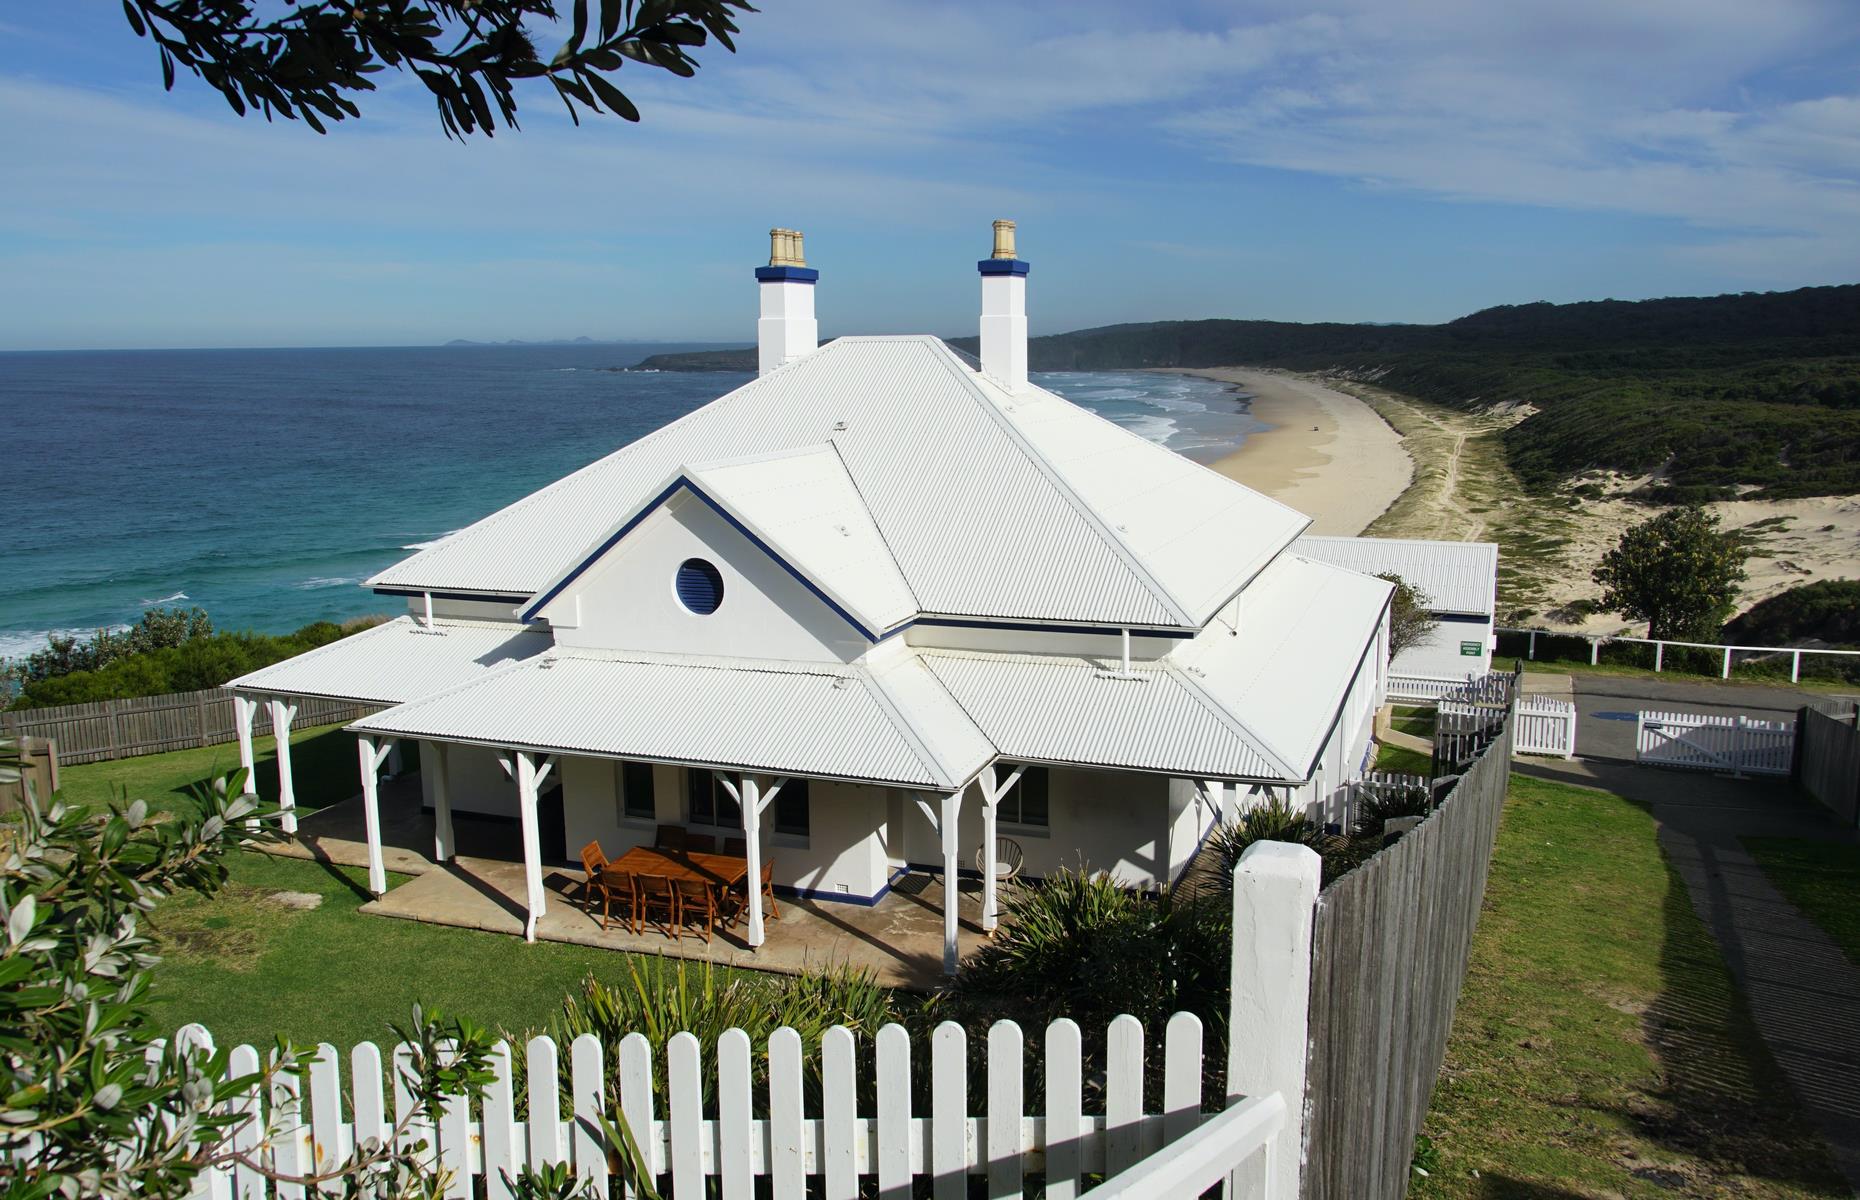 <p>Set on the mid-north coast of New South Wales, Pacific Palms is a collection of small and sleepy coastal villages, lakes, forest and spectacular beaches (standouts are Boomerang Beach, Blueys Beach and Elizabeth Beach). Soak in the views from 19th-century Sugarloaf Point Lighthouse (pictured), east of Seal Rocks village. You can stay here too. Catch the waves and go snorkeling at Blueys Beach or set off on a hike from Elizabeth Bay into Booti Booti National Park. You can follow a walking trail at the beach’s northern end towards Seven Mile beach, a noted whale-watching spot in winter.</p>